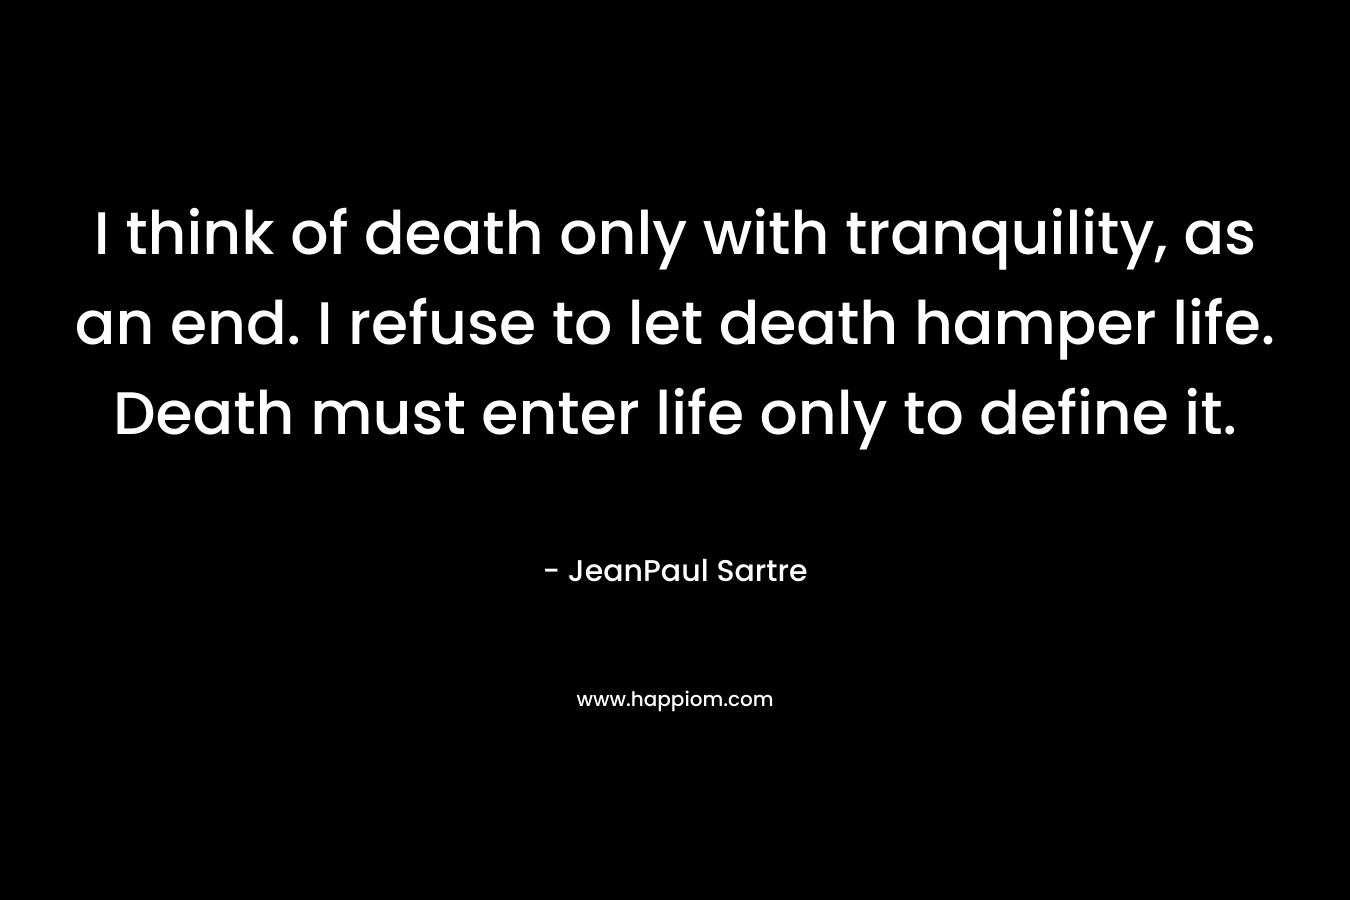 I think of death only with tranquility, as an end. I refuse to let death hamper life. Death must enter life only to define it.